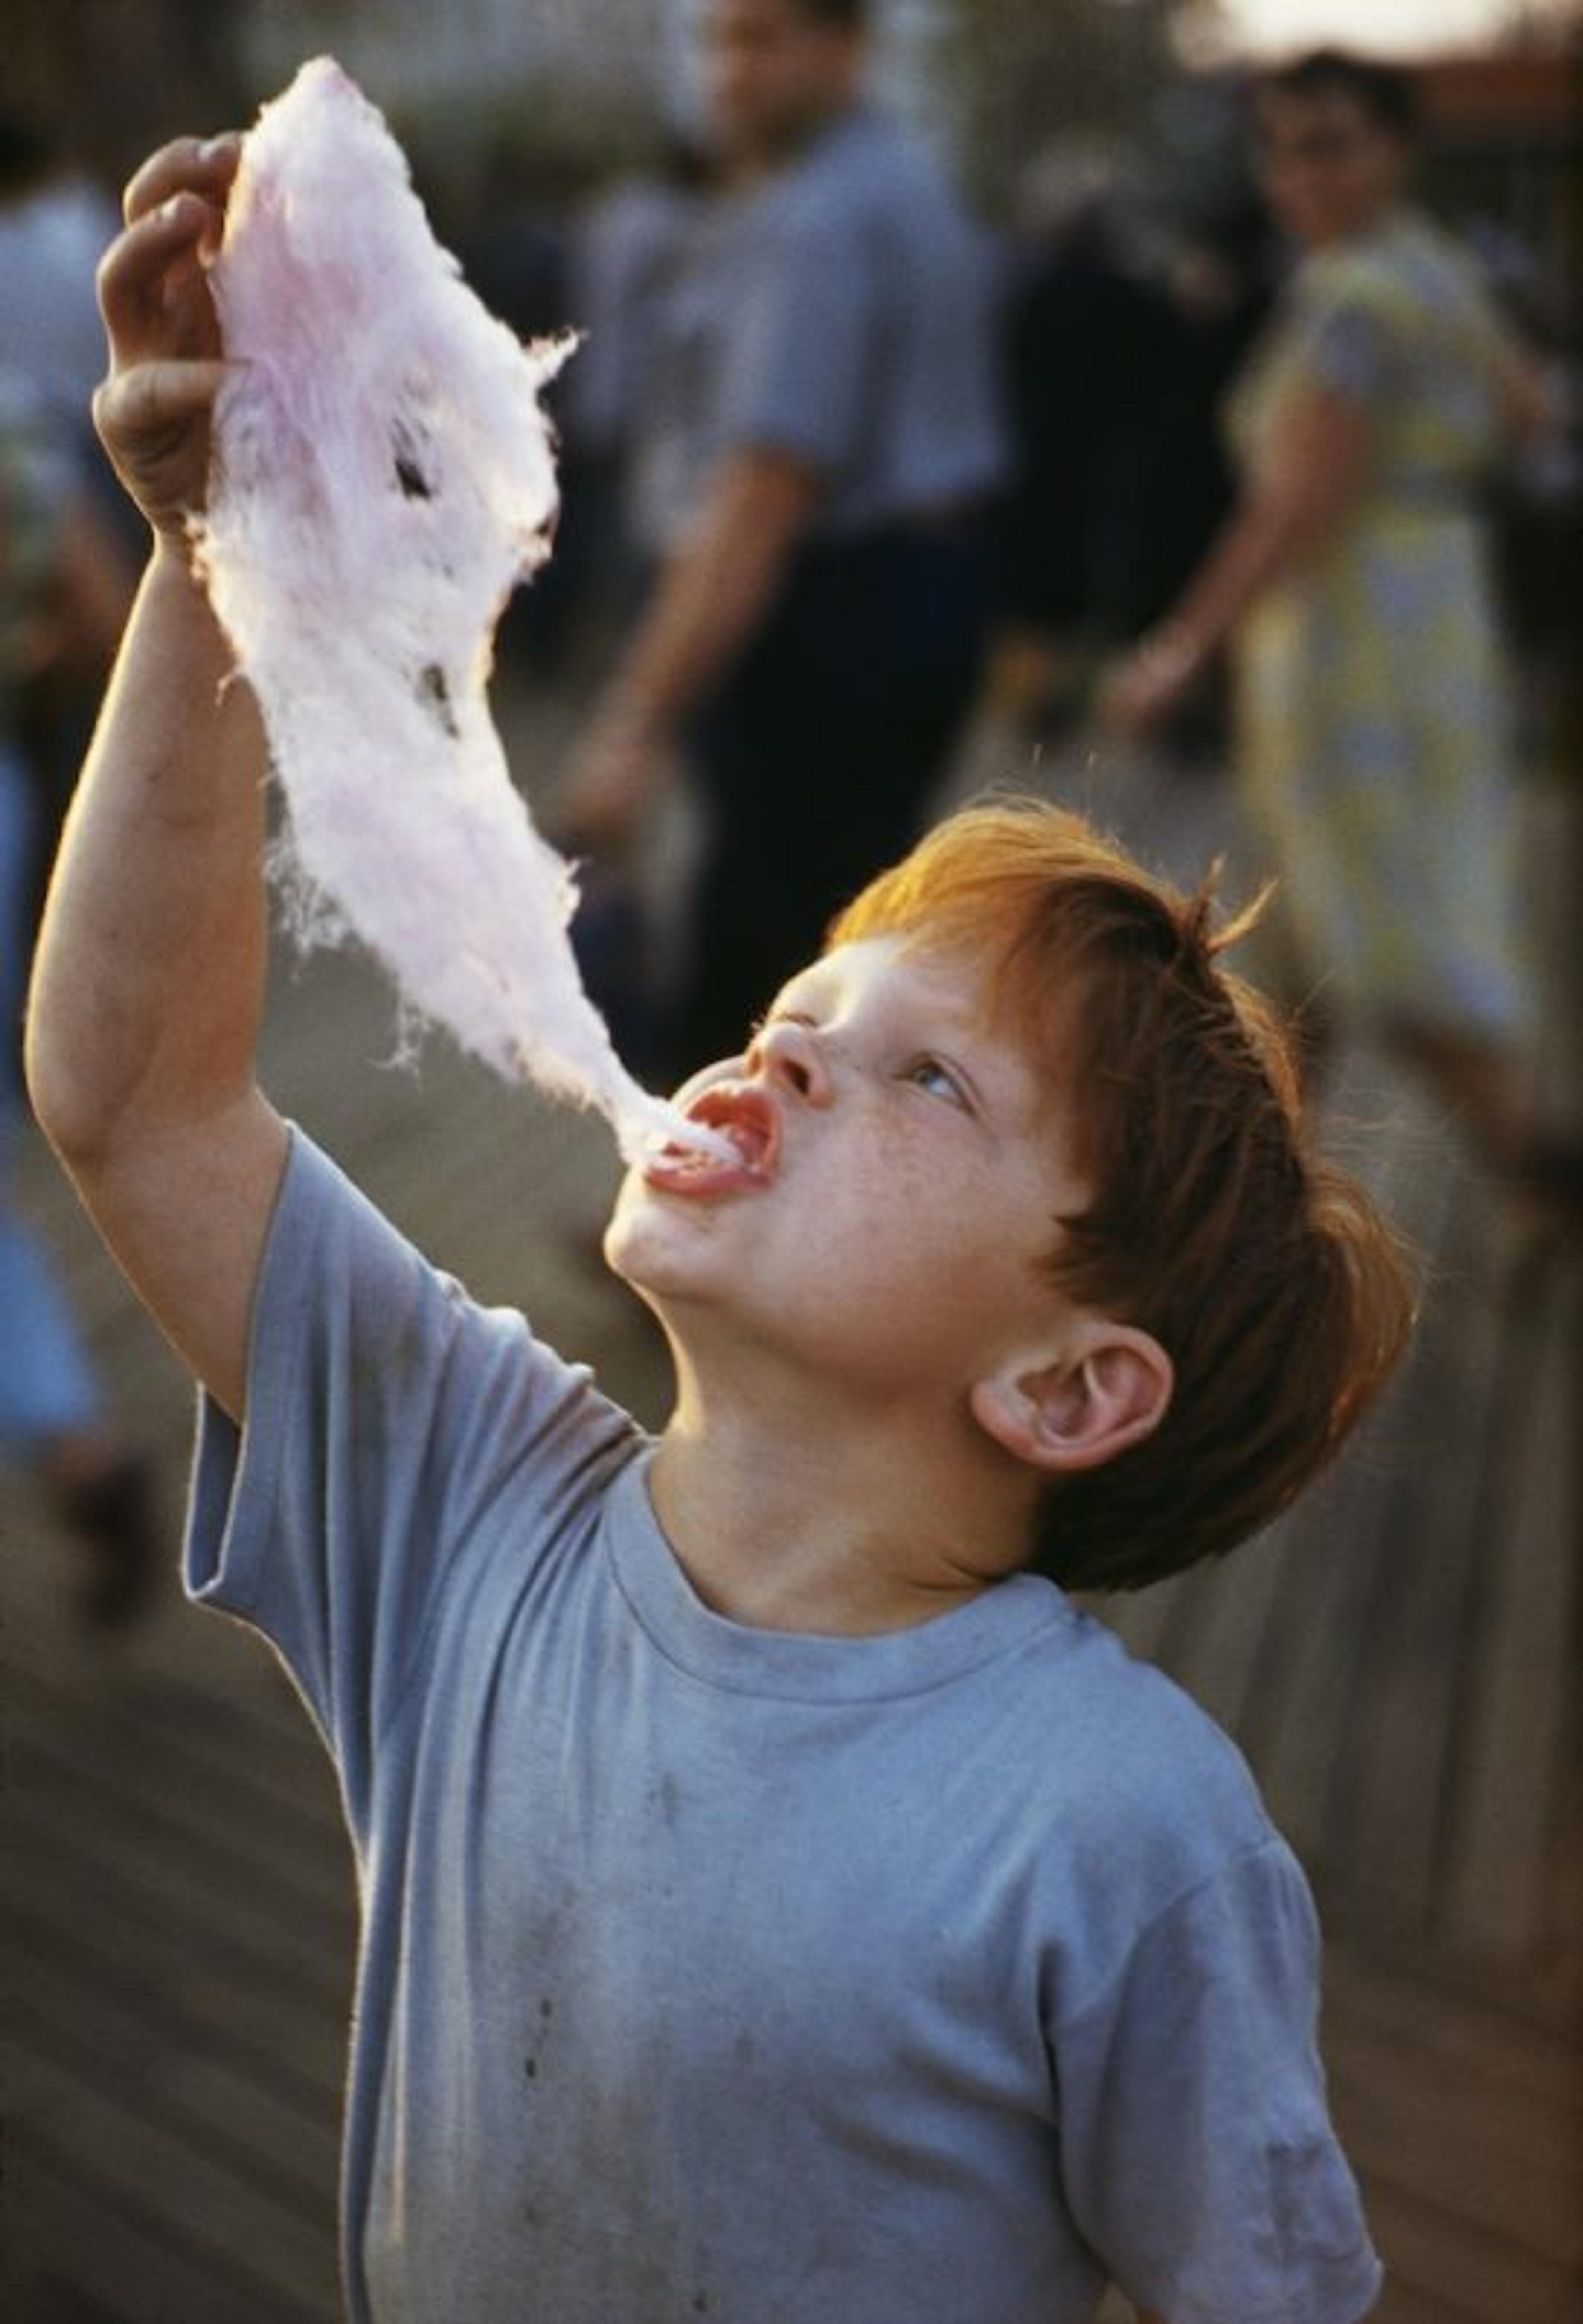 A photograph of a child at a festival dangling cotton candy above their head to eat it